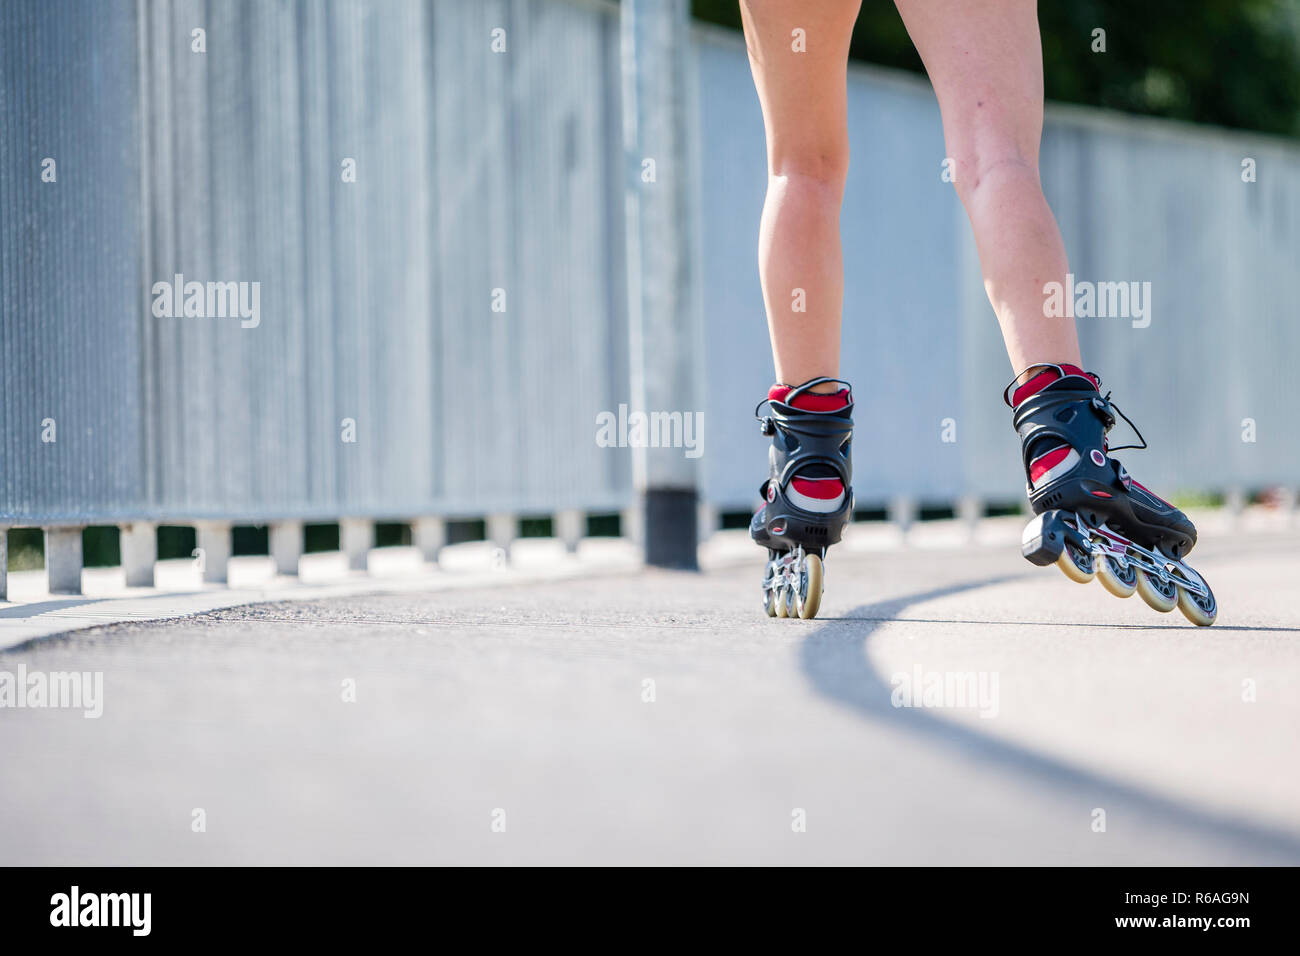 woman,20 years,inline skating,detail skates and legs Stock Photo